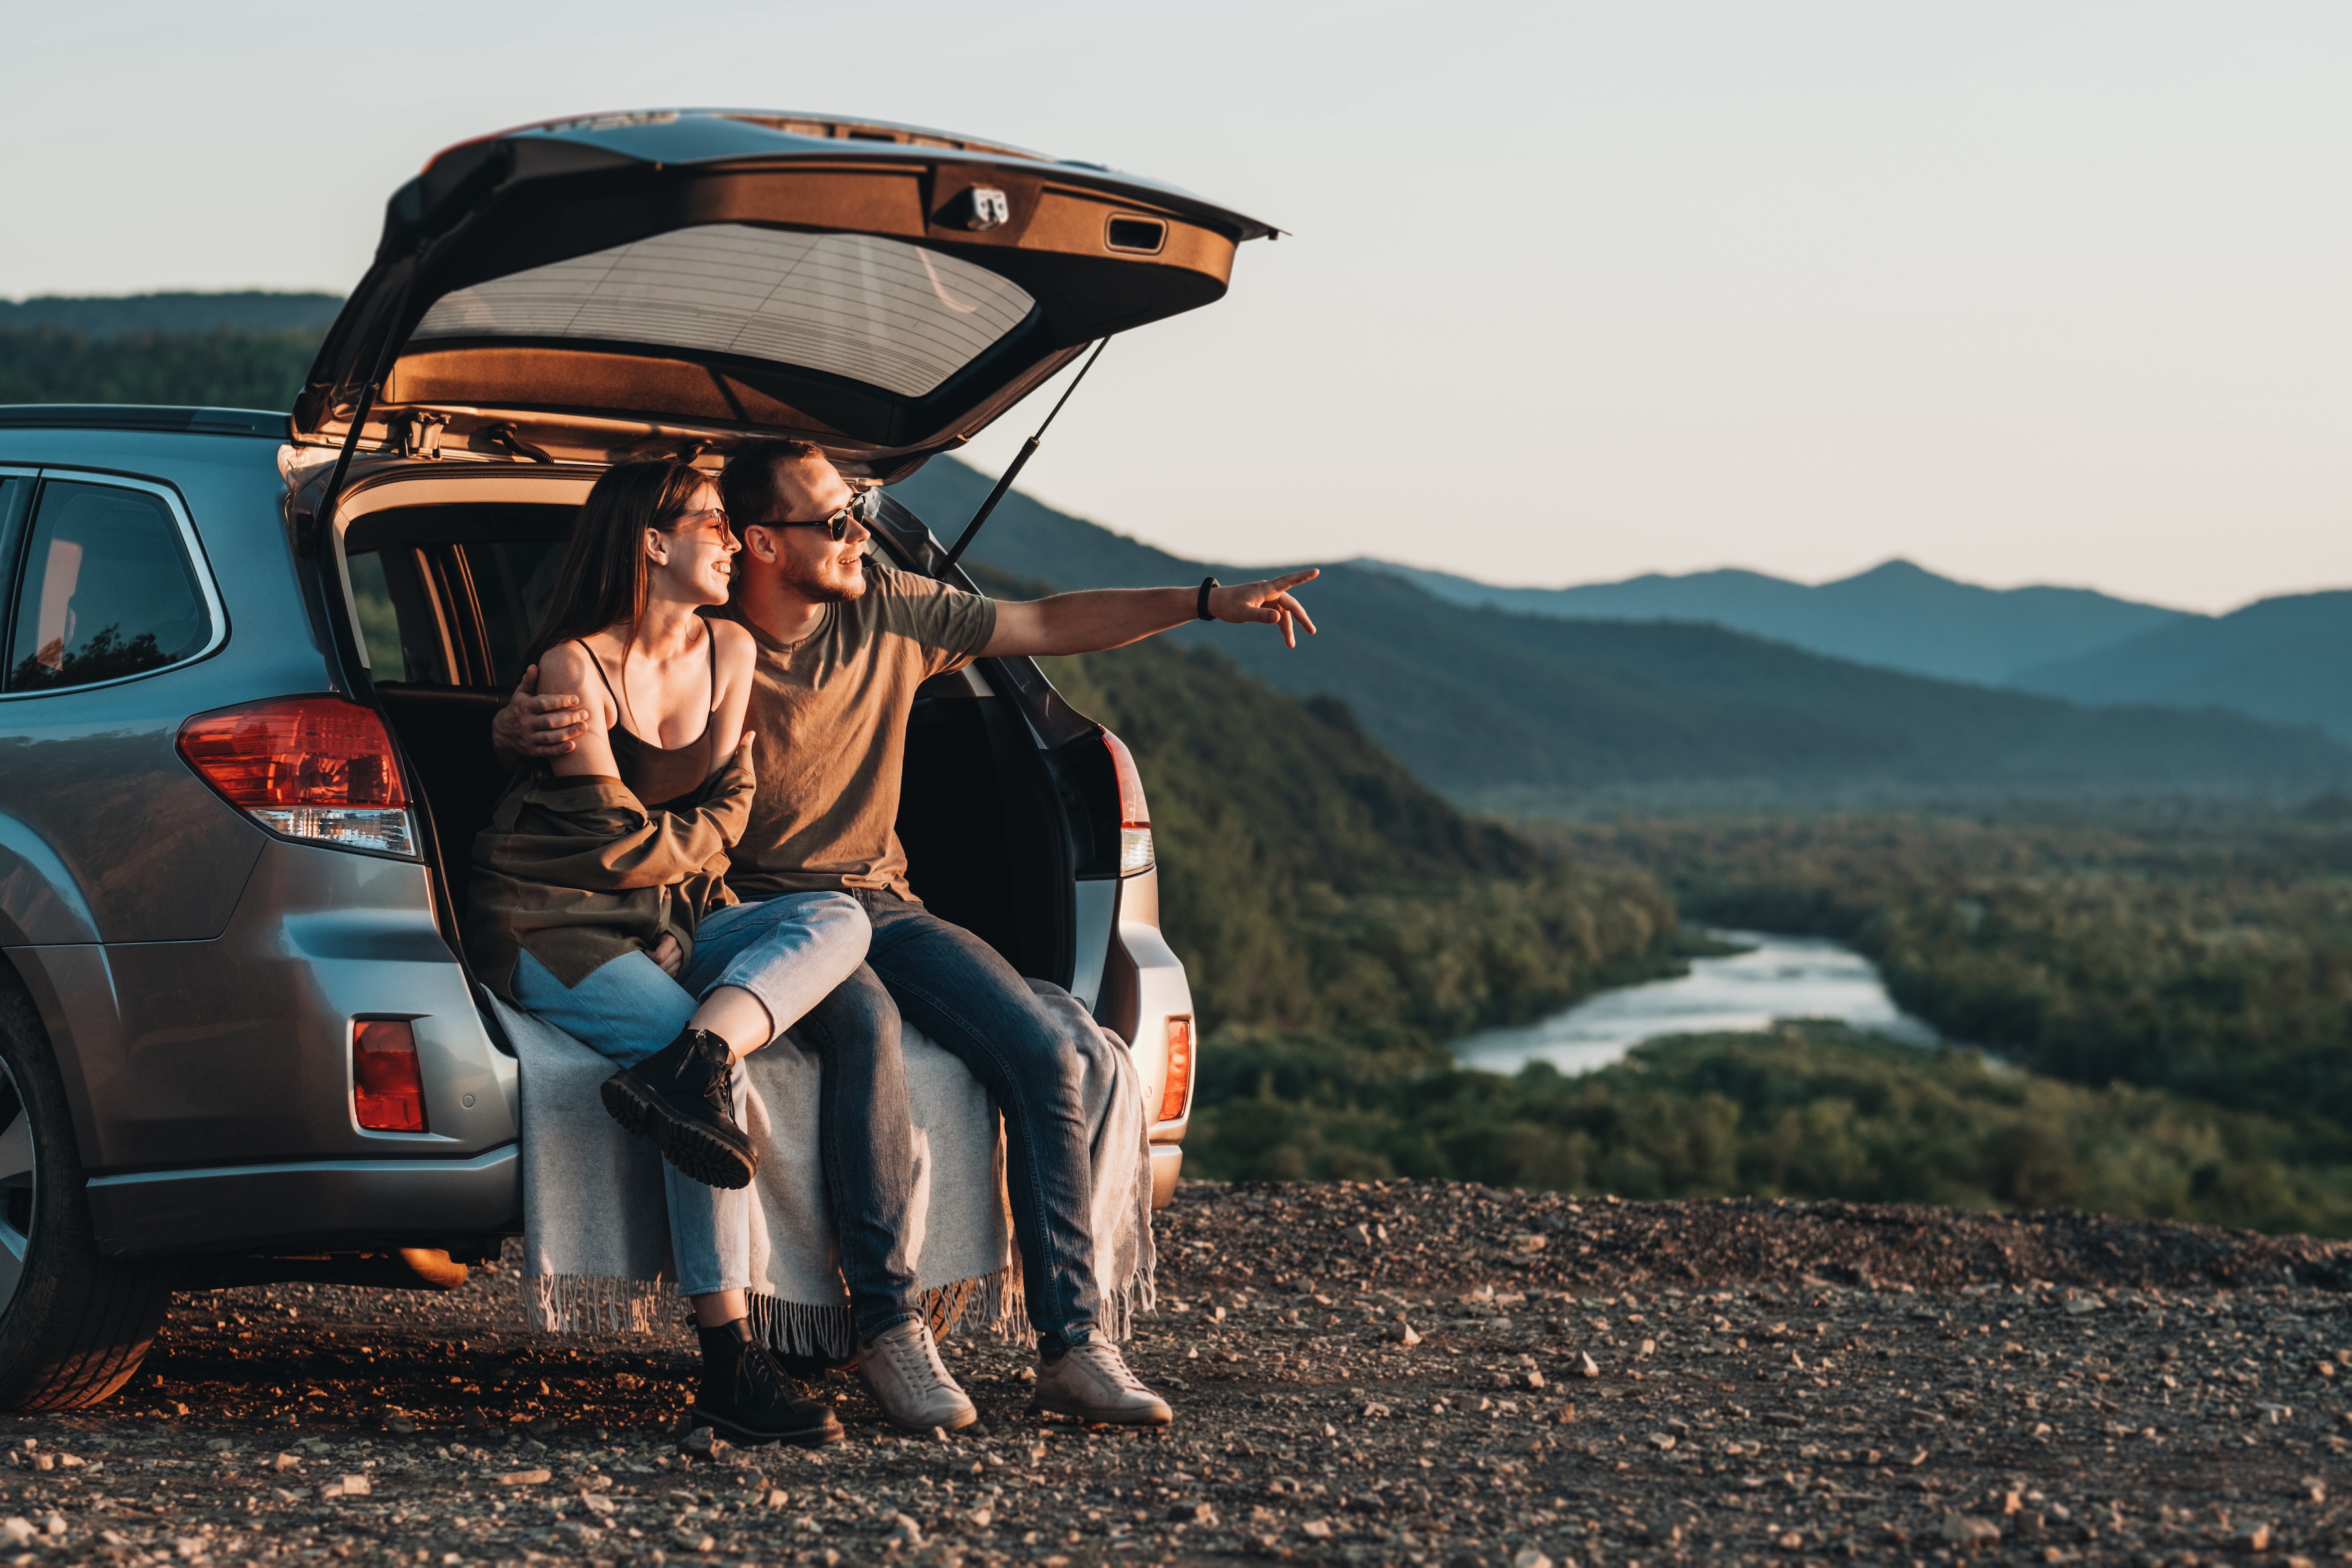 A newly married couple sit on the bumper of their van as they honeymoon. When a prenuptial agreement is done correctly, it’s beneficial to all prospective spouses.